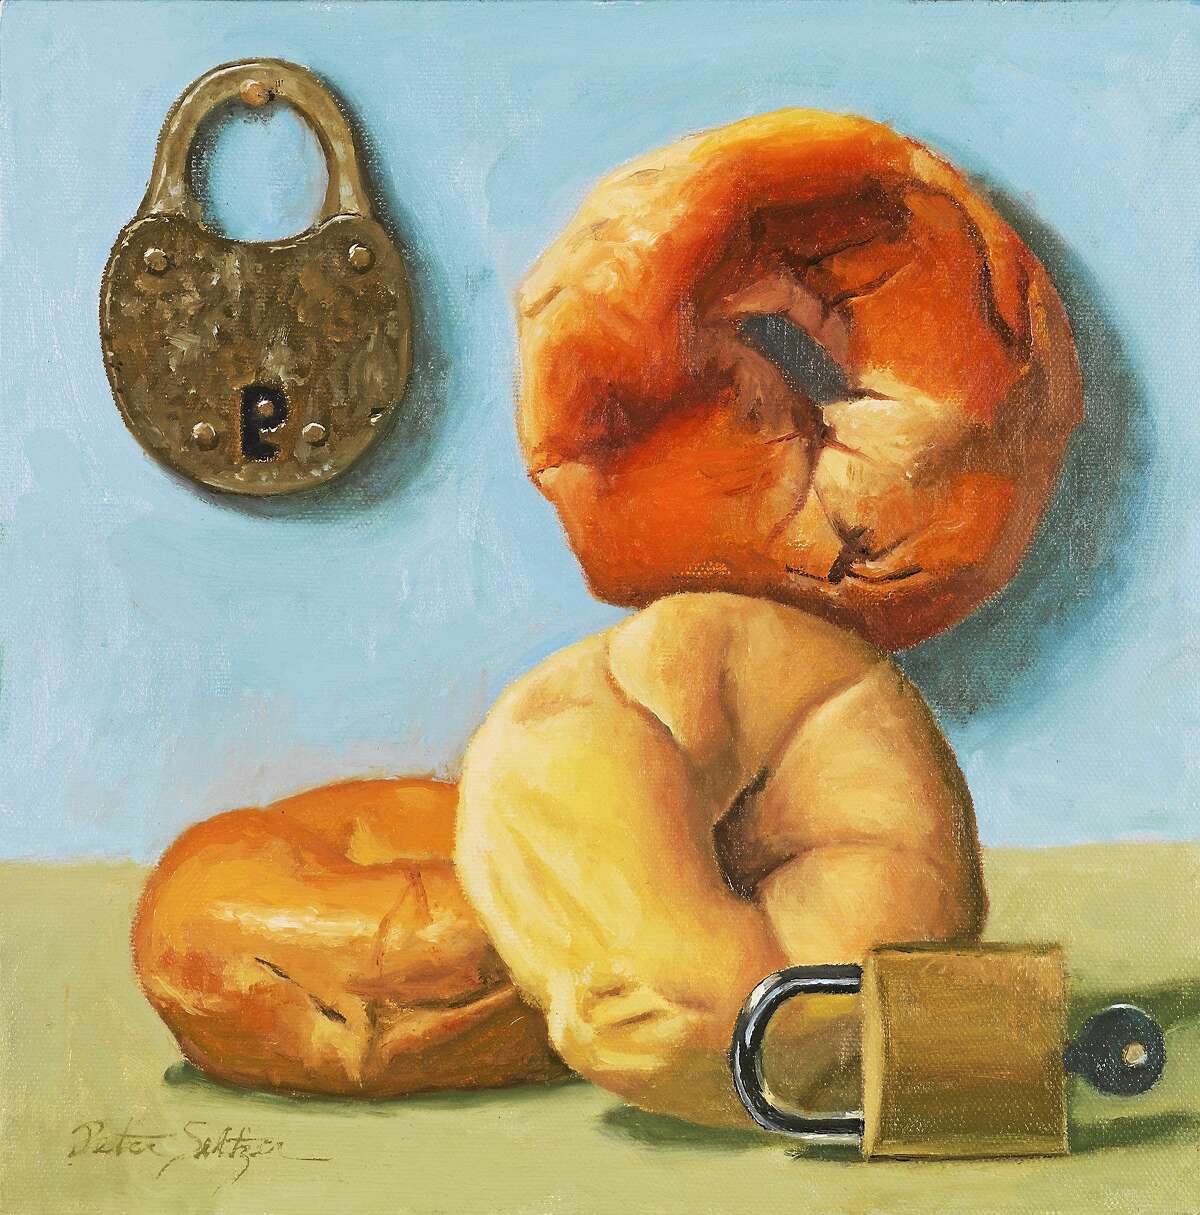 YOU GUESSED IT: Peter Seltzer’s “Bagels and Locks,” an oil on linen, is one of the paintings on display at Arts Center Killingworth’s new Spectrum Gallery and Artisans Store, 61 Main St. in Centerbrook. The exhibit, called “Food: the Good, the Bad and the Ugly,” opens with a reception Friday at the gallery in Centerbrook, where some 80 artists and artisans from Stamford to Hartford are participating.